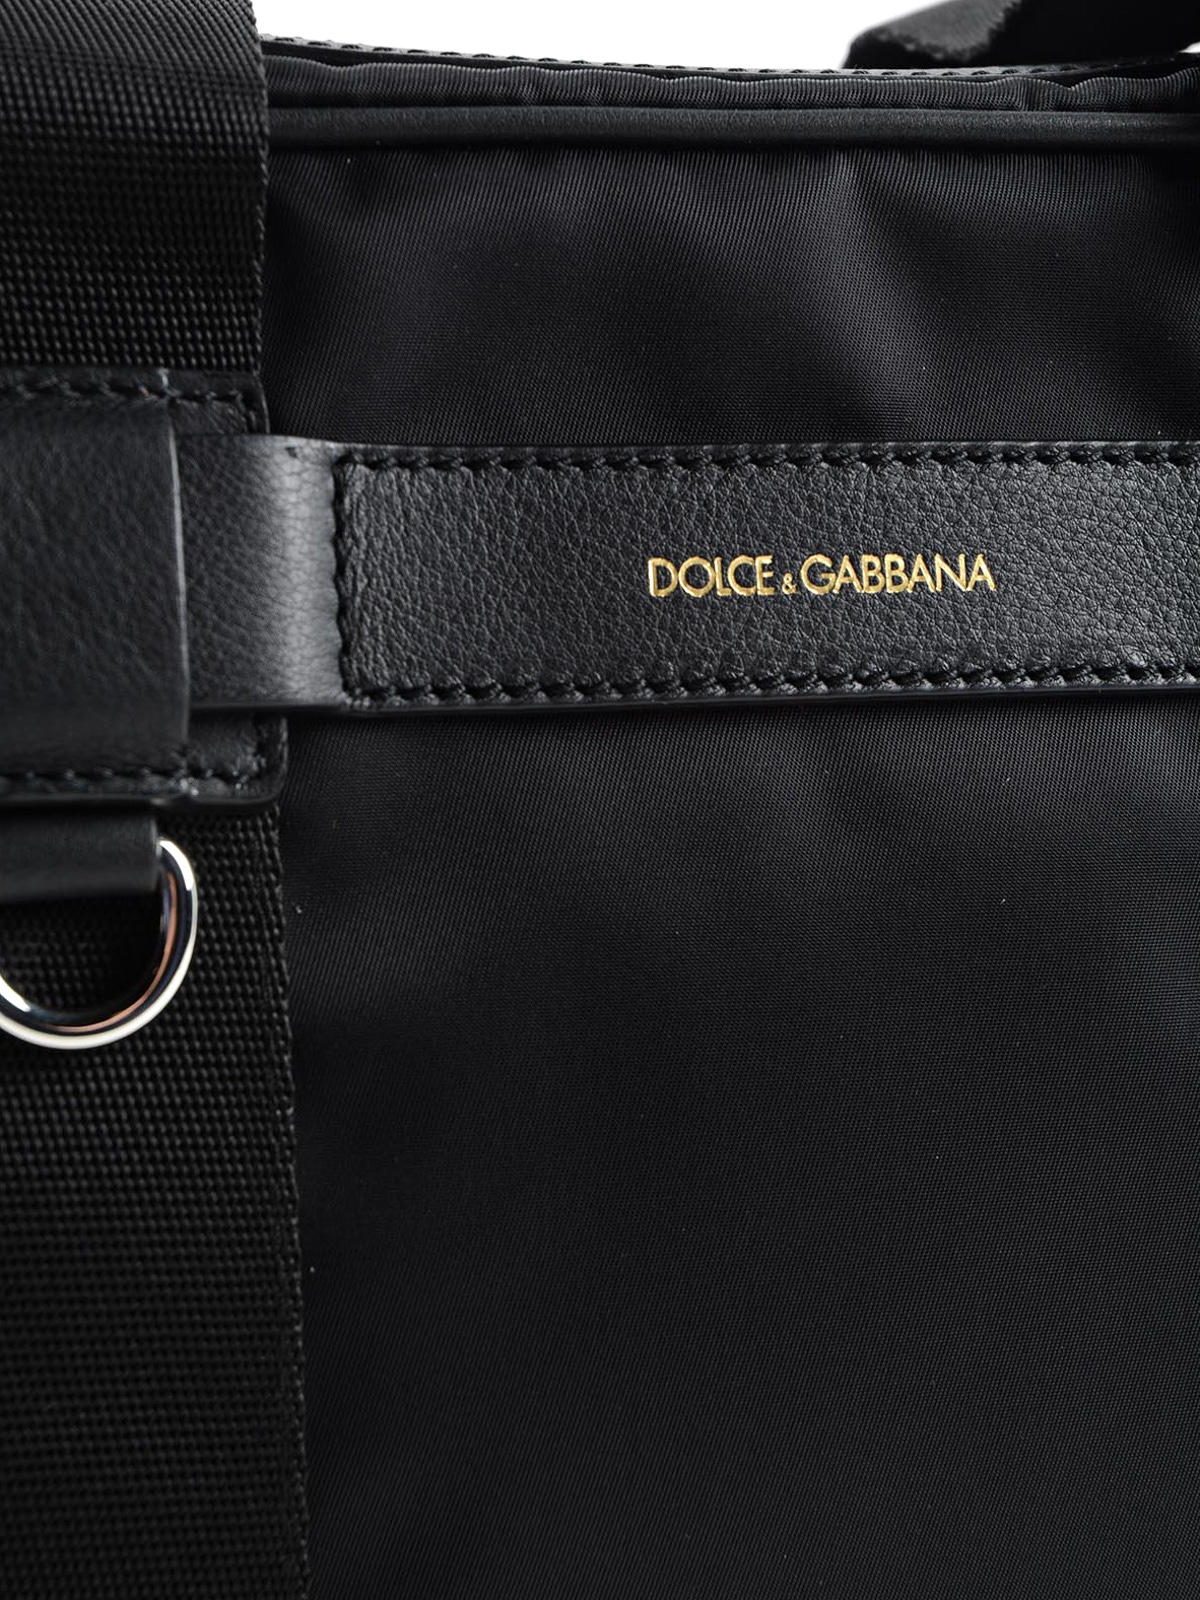 Dolce & Gabbana Briefcase in Black for Men Save 32% Mens Bags Briefcases and laptop bags 